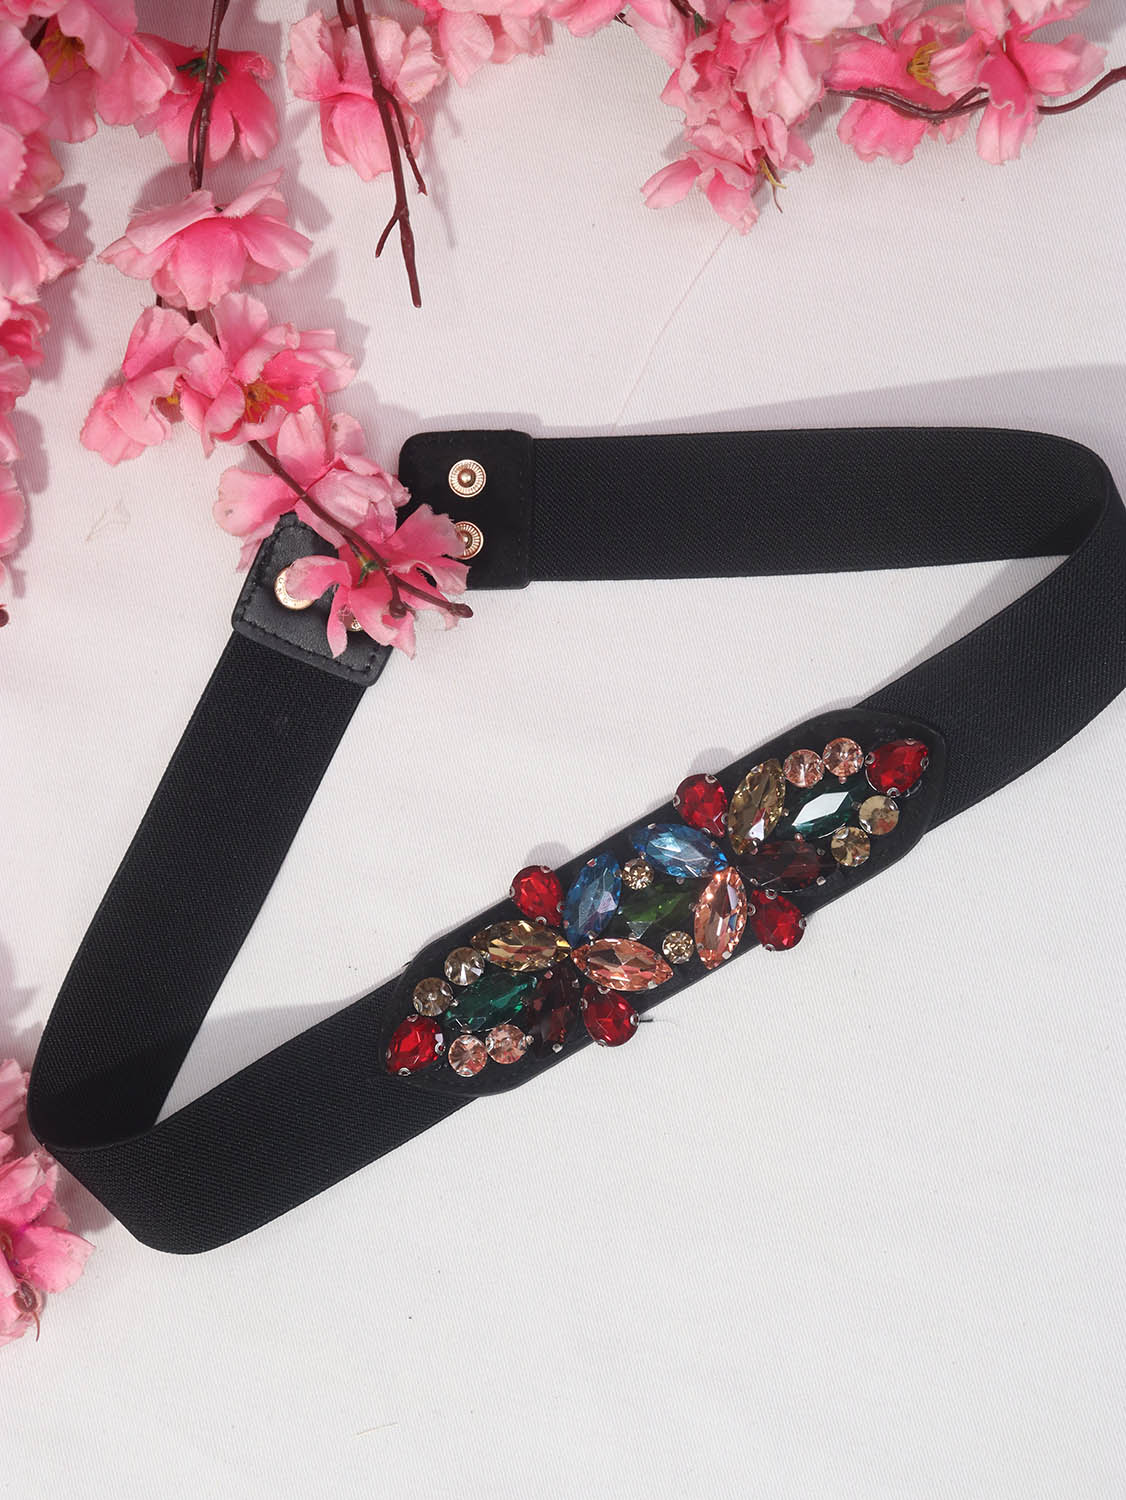 Upgrade Your Style with Blackout Buckle-Up Belts - Shop Now!